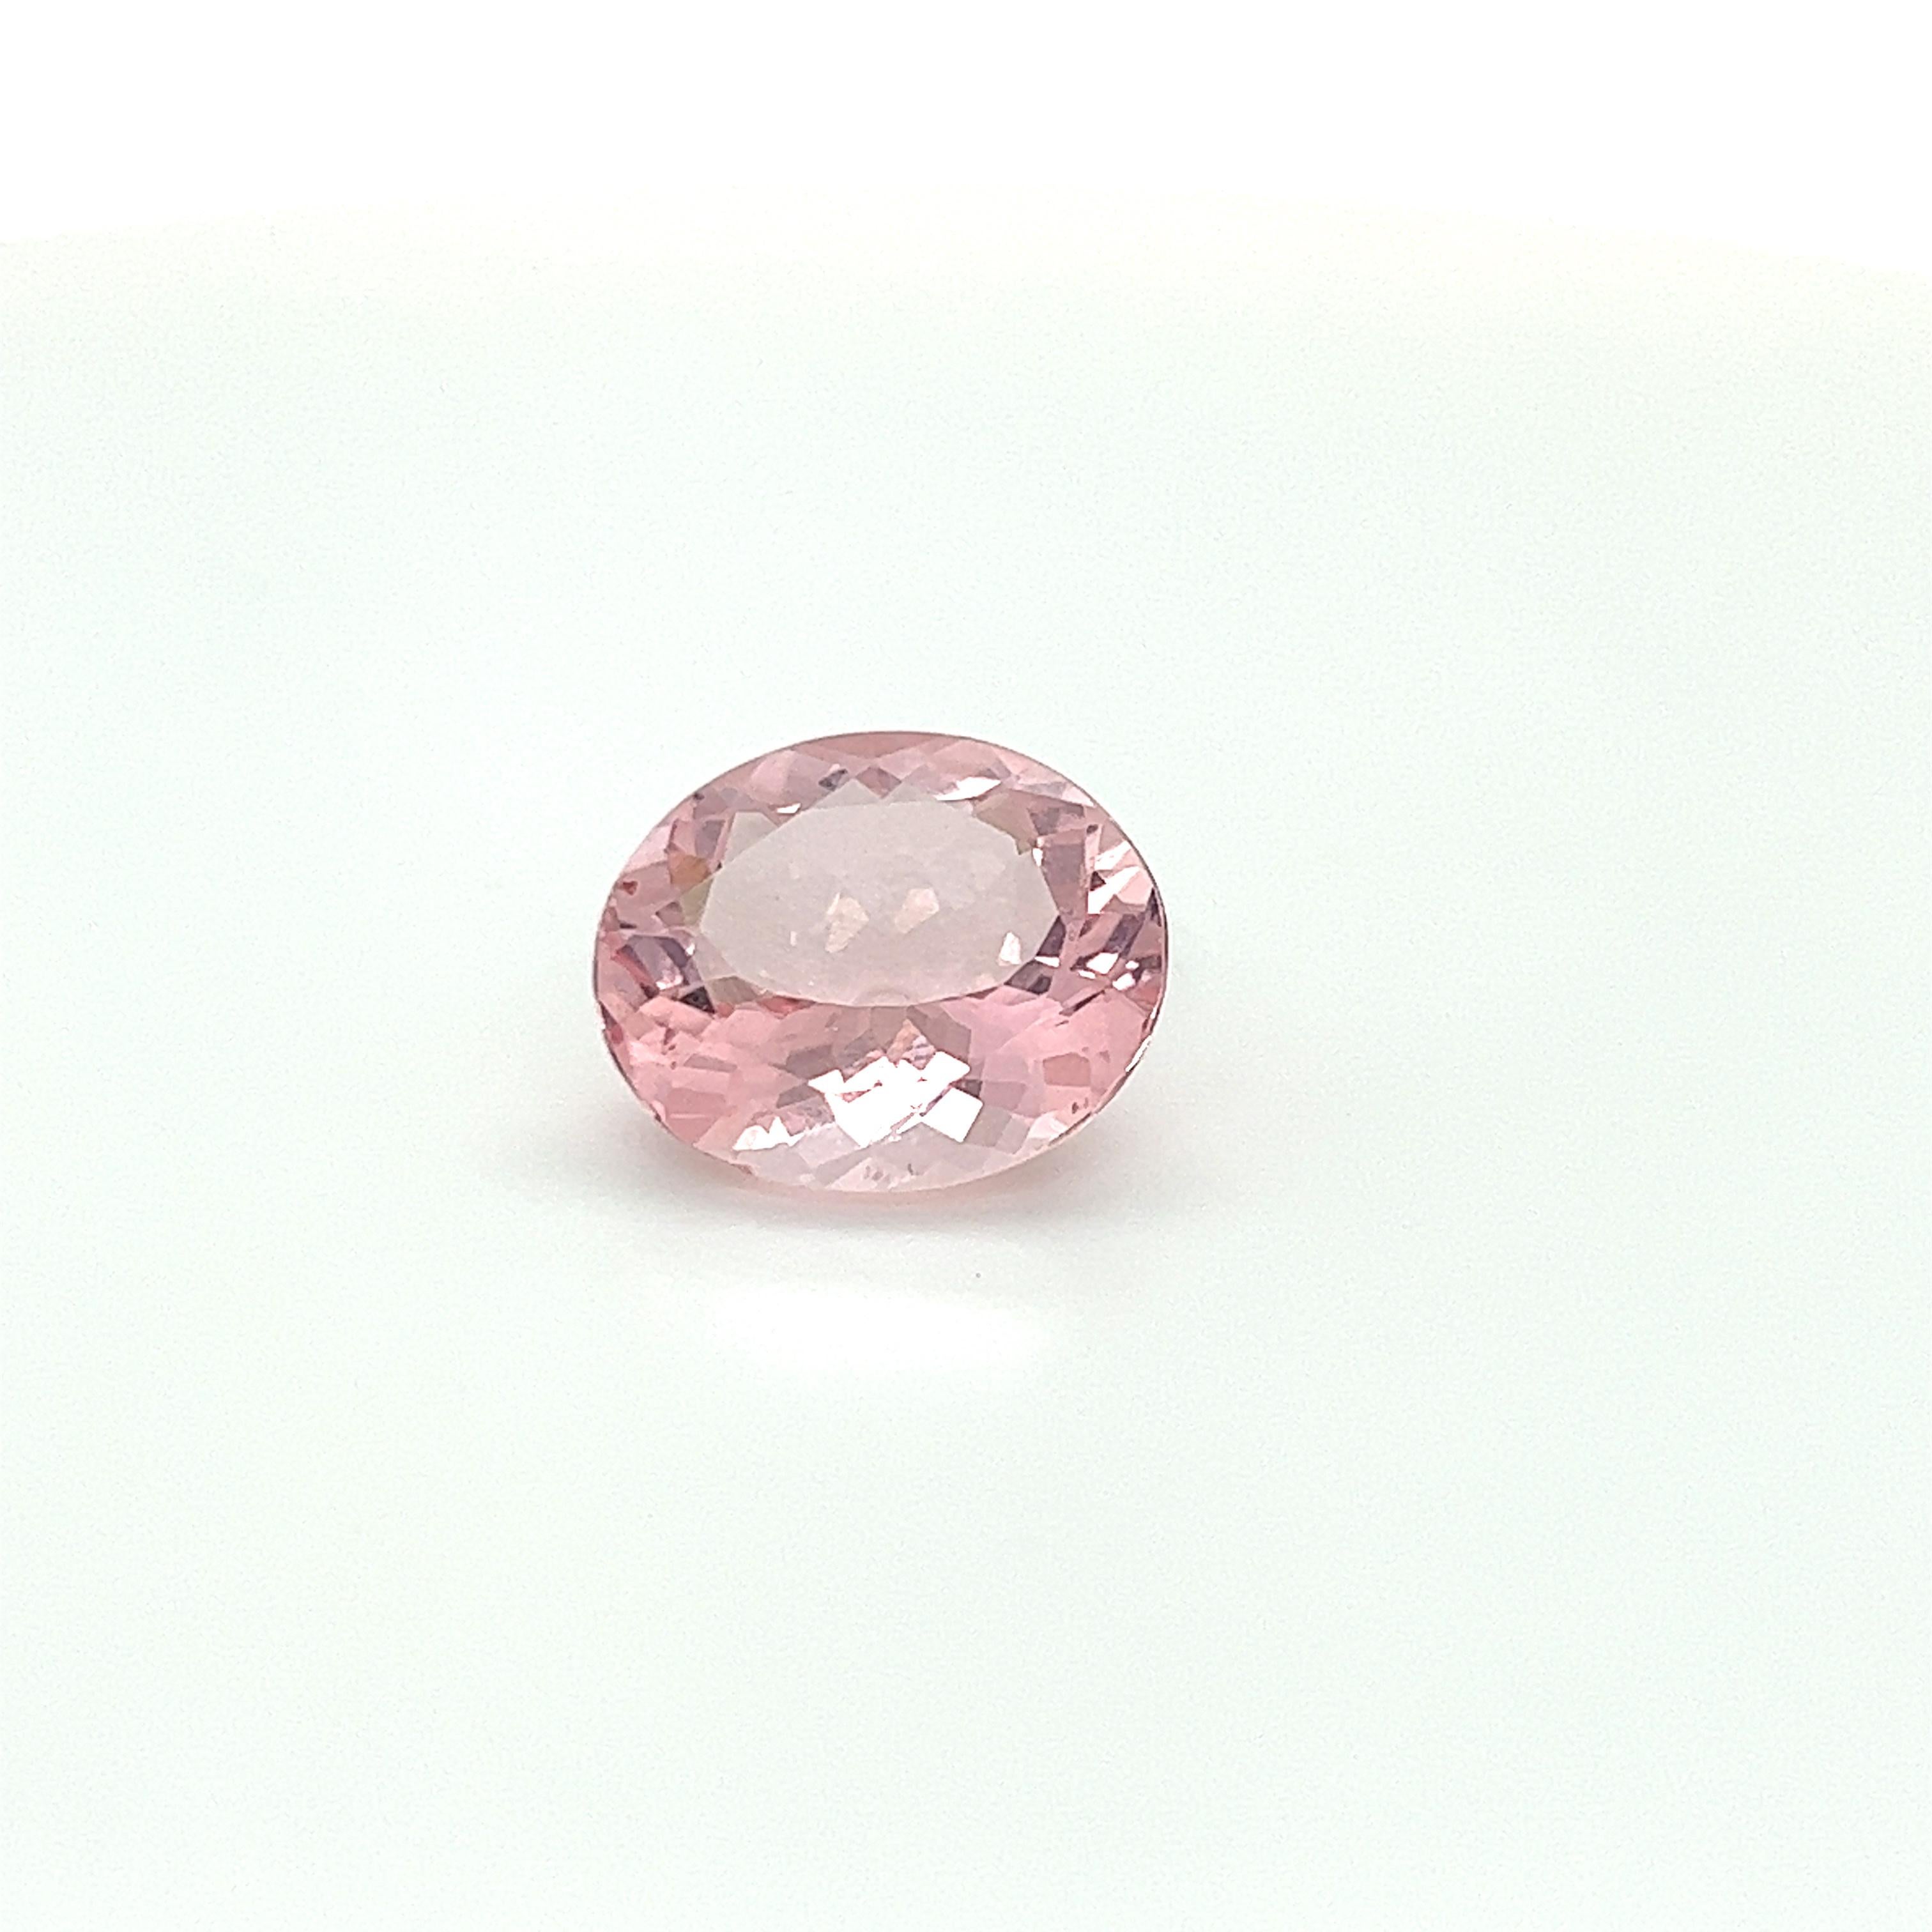 Oval Cut 7.02 Carat AAA Natural Pink Morganite Oval Shape Loose Gemstone Jewelry For Sale